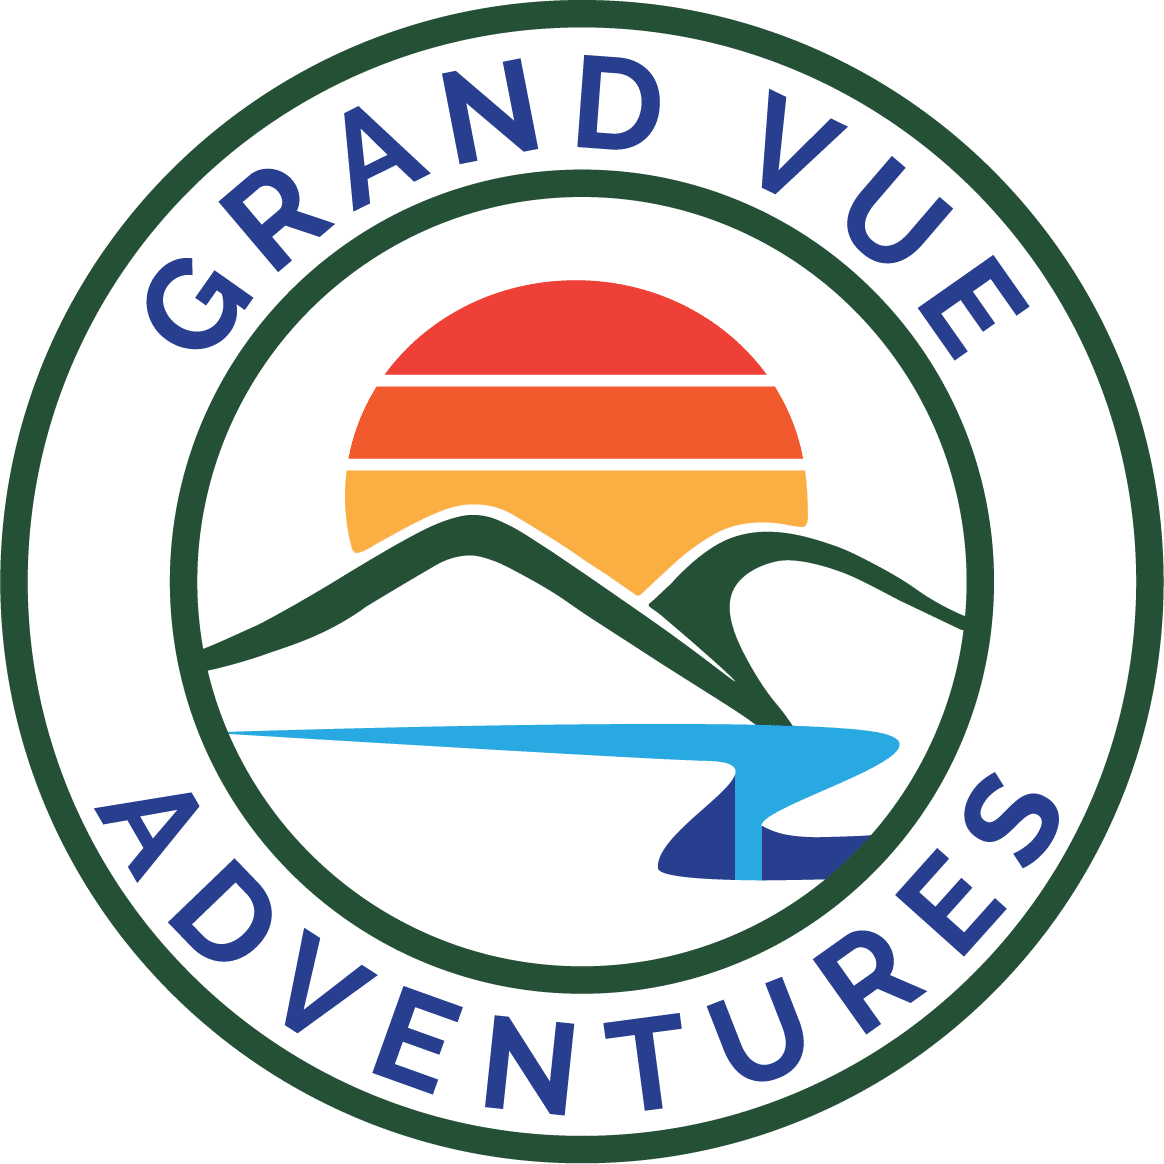 Grand Vue Adventures logo featuring a stylized sunset behind mountains with a river in the foreground